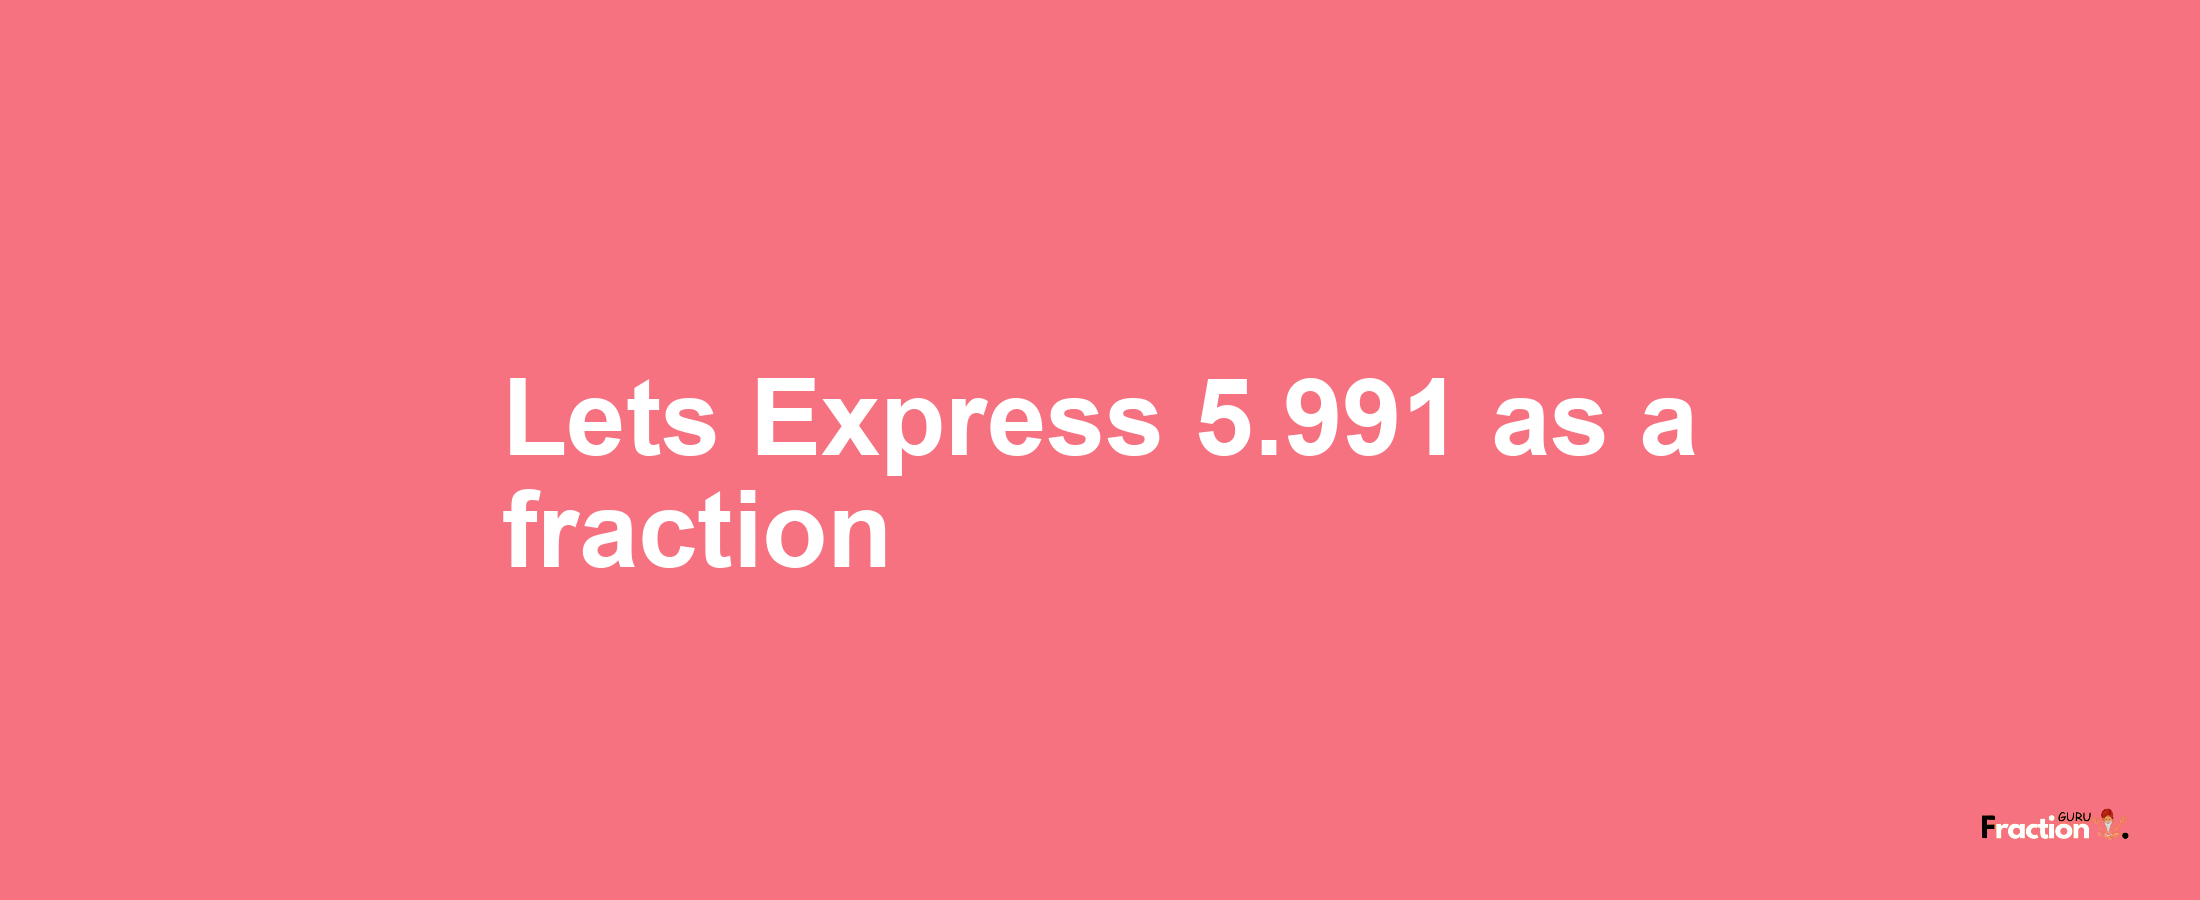 Lets Express 5.991 as afraction